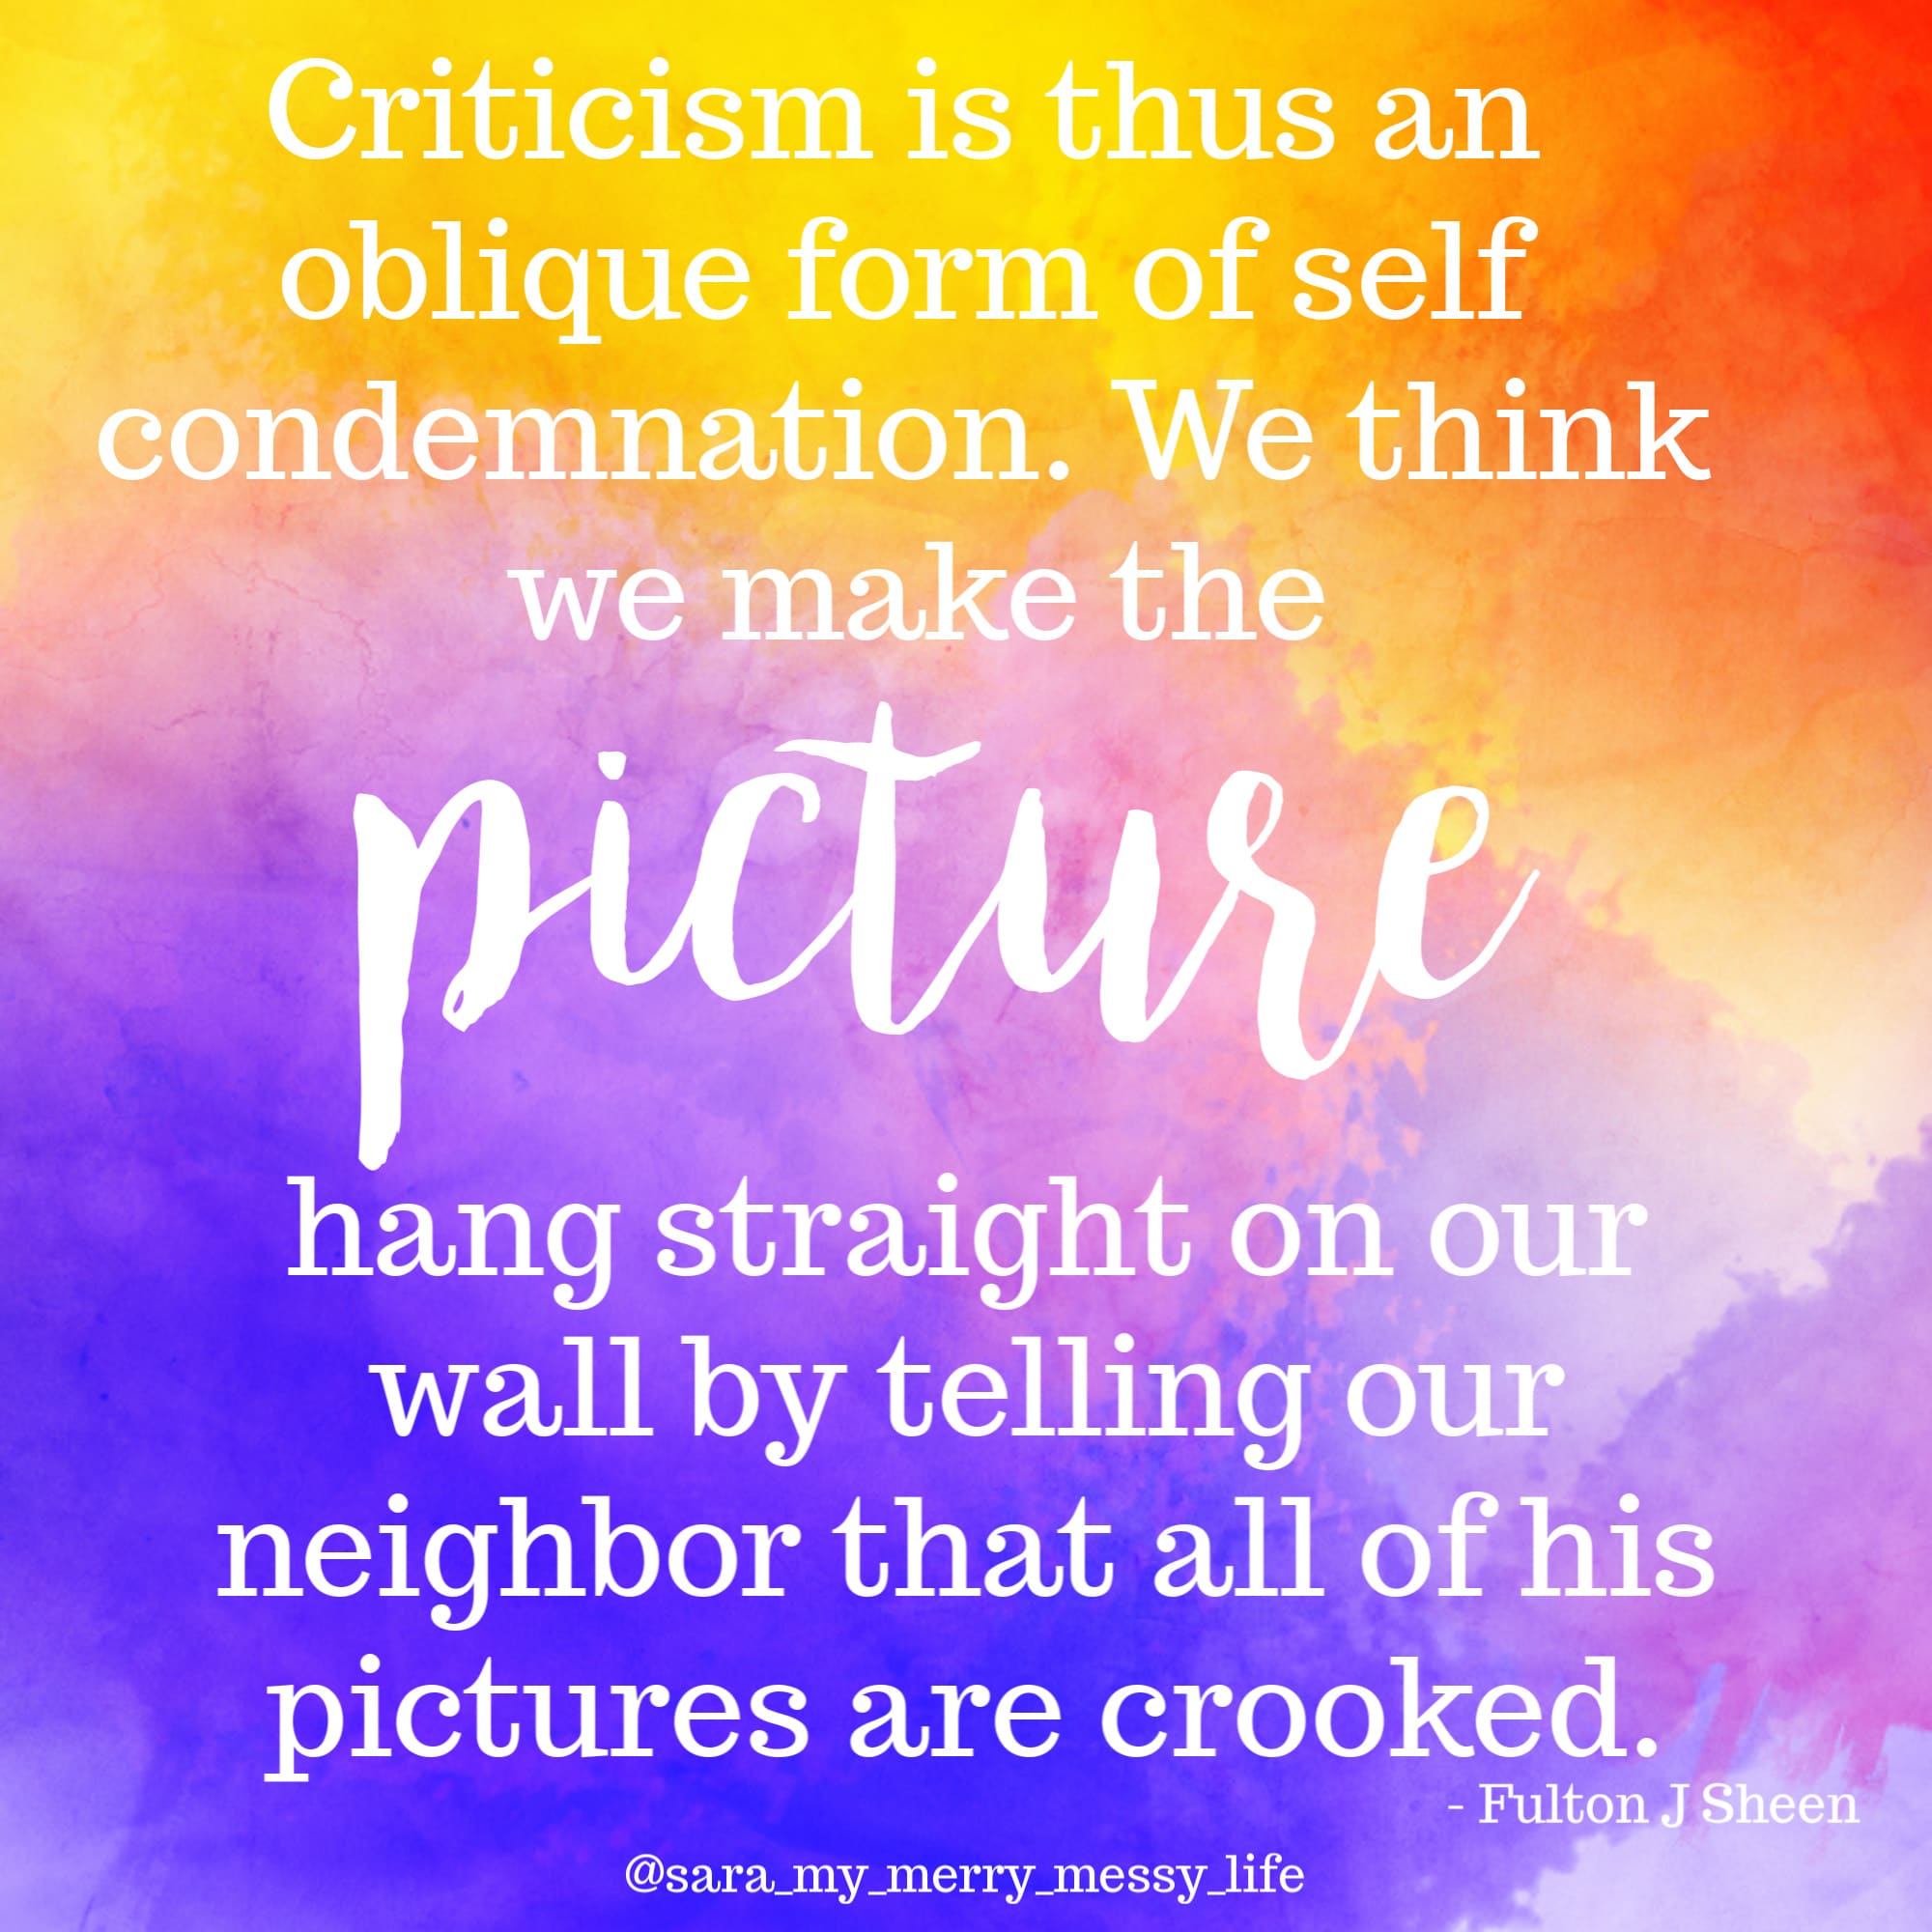 Criticism is thus a form of self condemnation. We think we make the picture hang straight on our wall by telling our neighbor that all of his pictures are crooked.